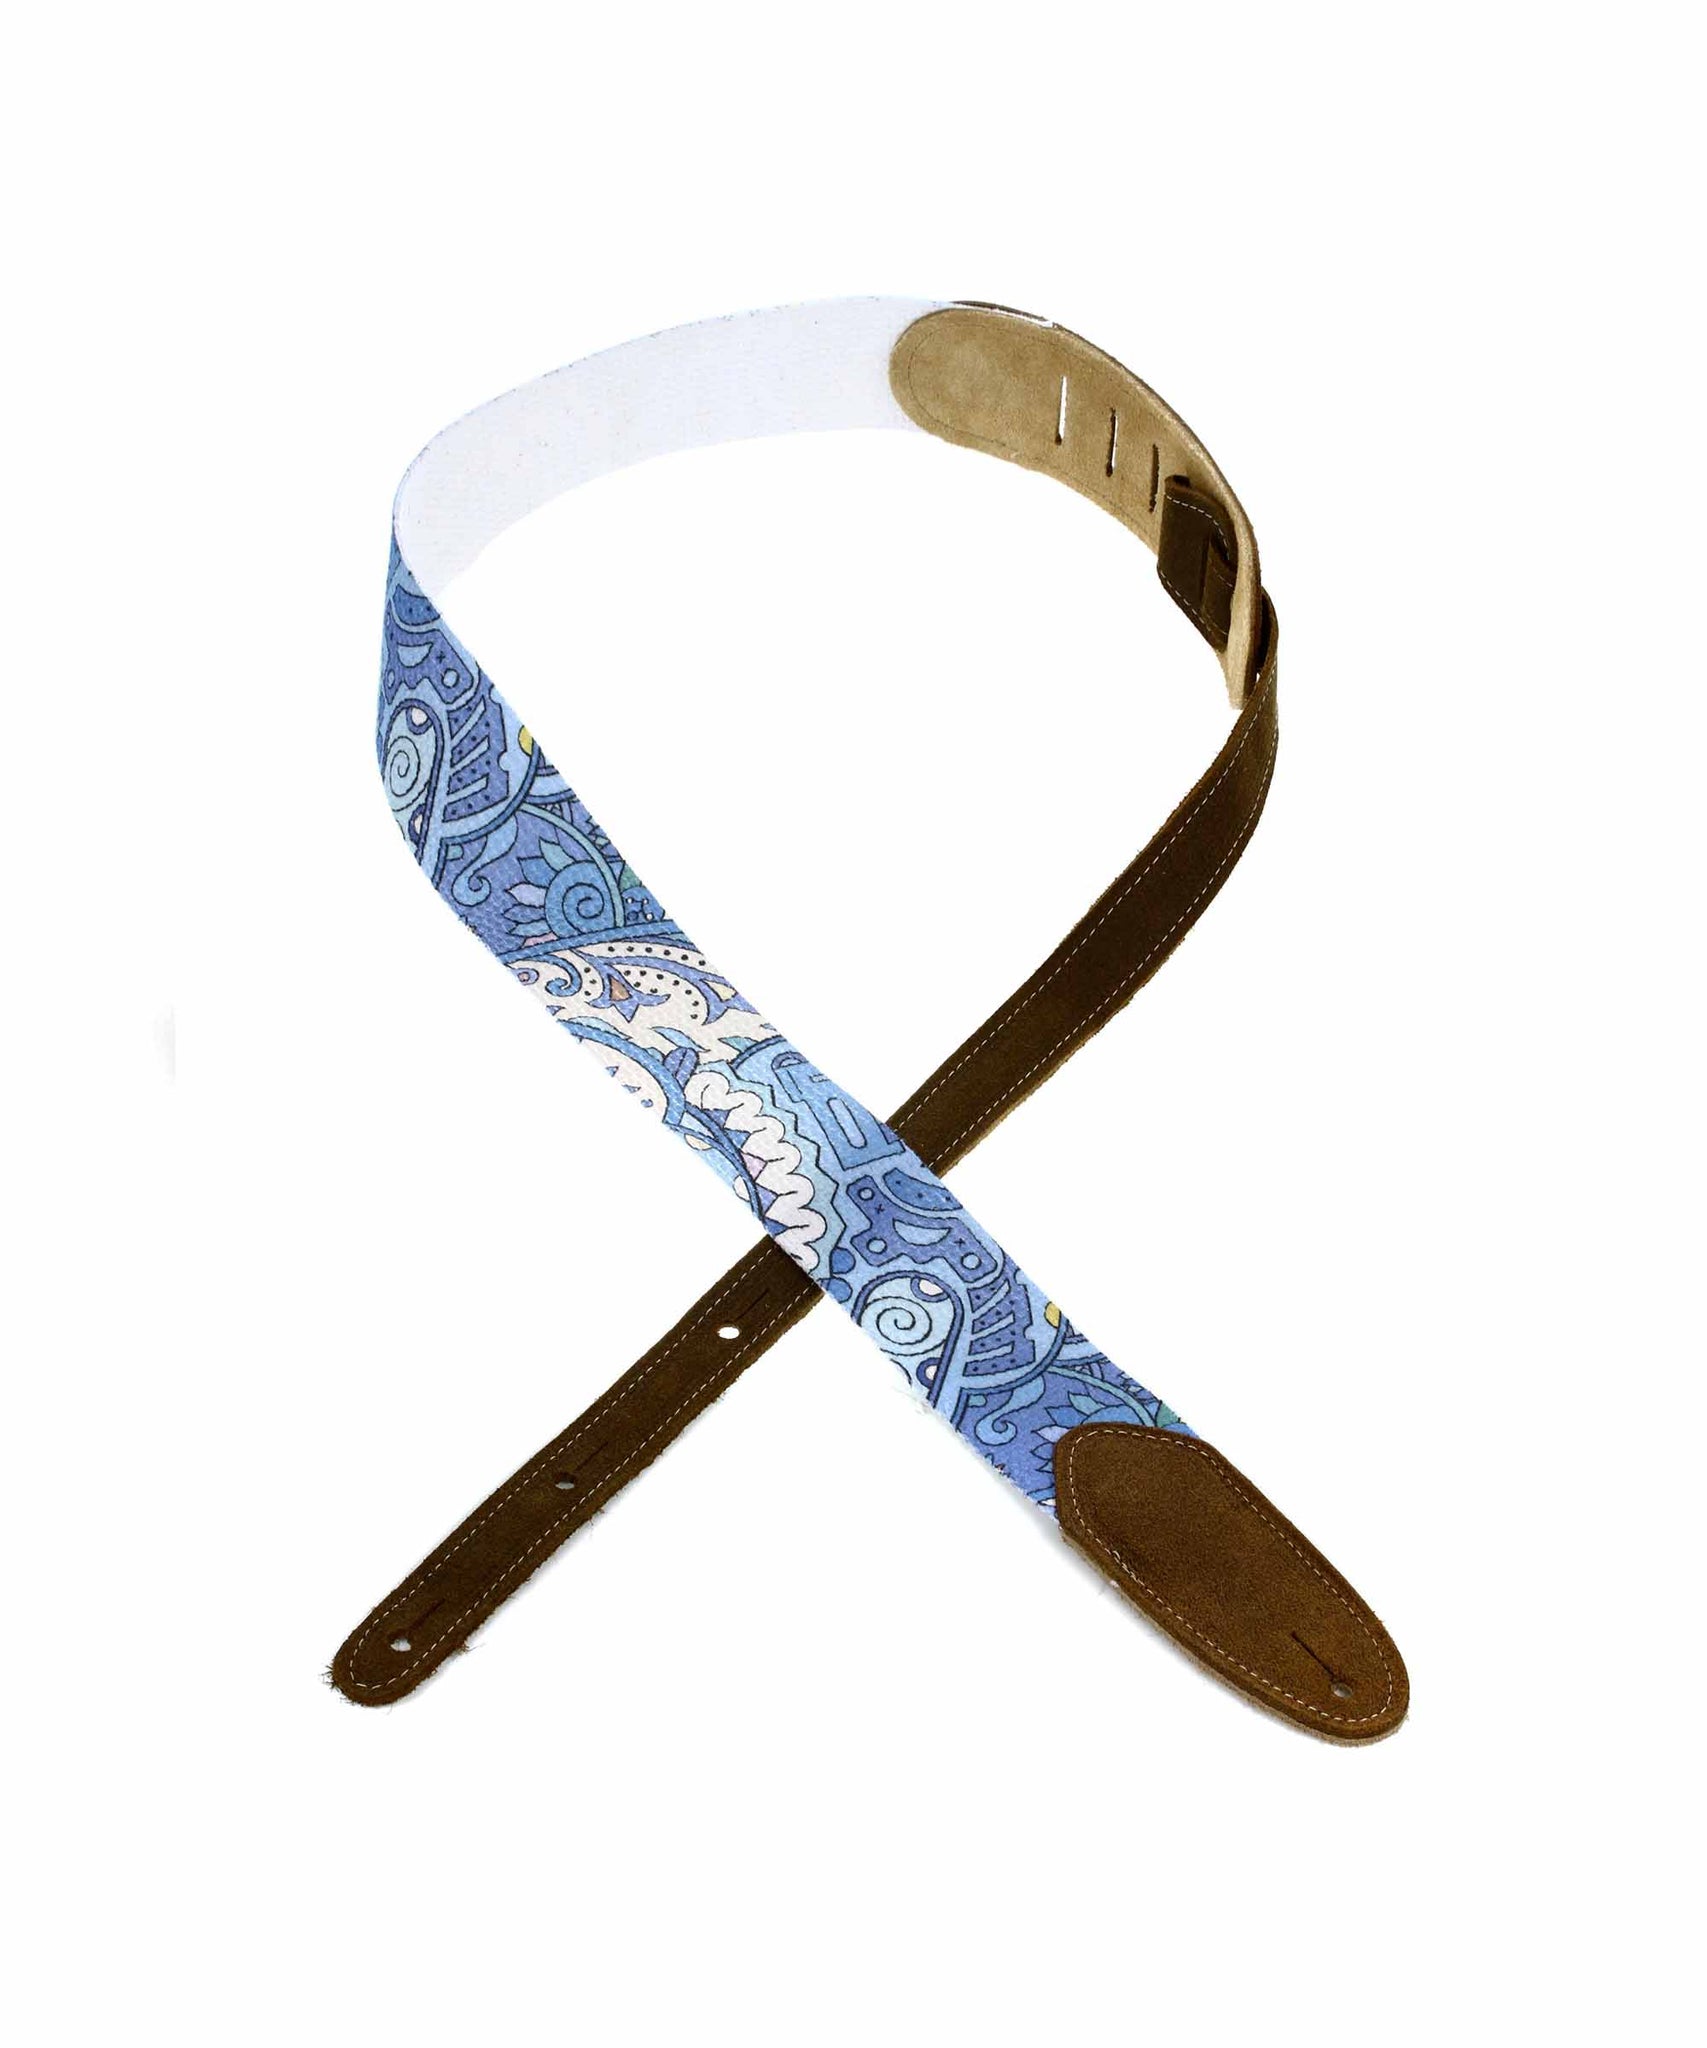 LM Products Woodstock Series Guitar Strap - Blue